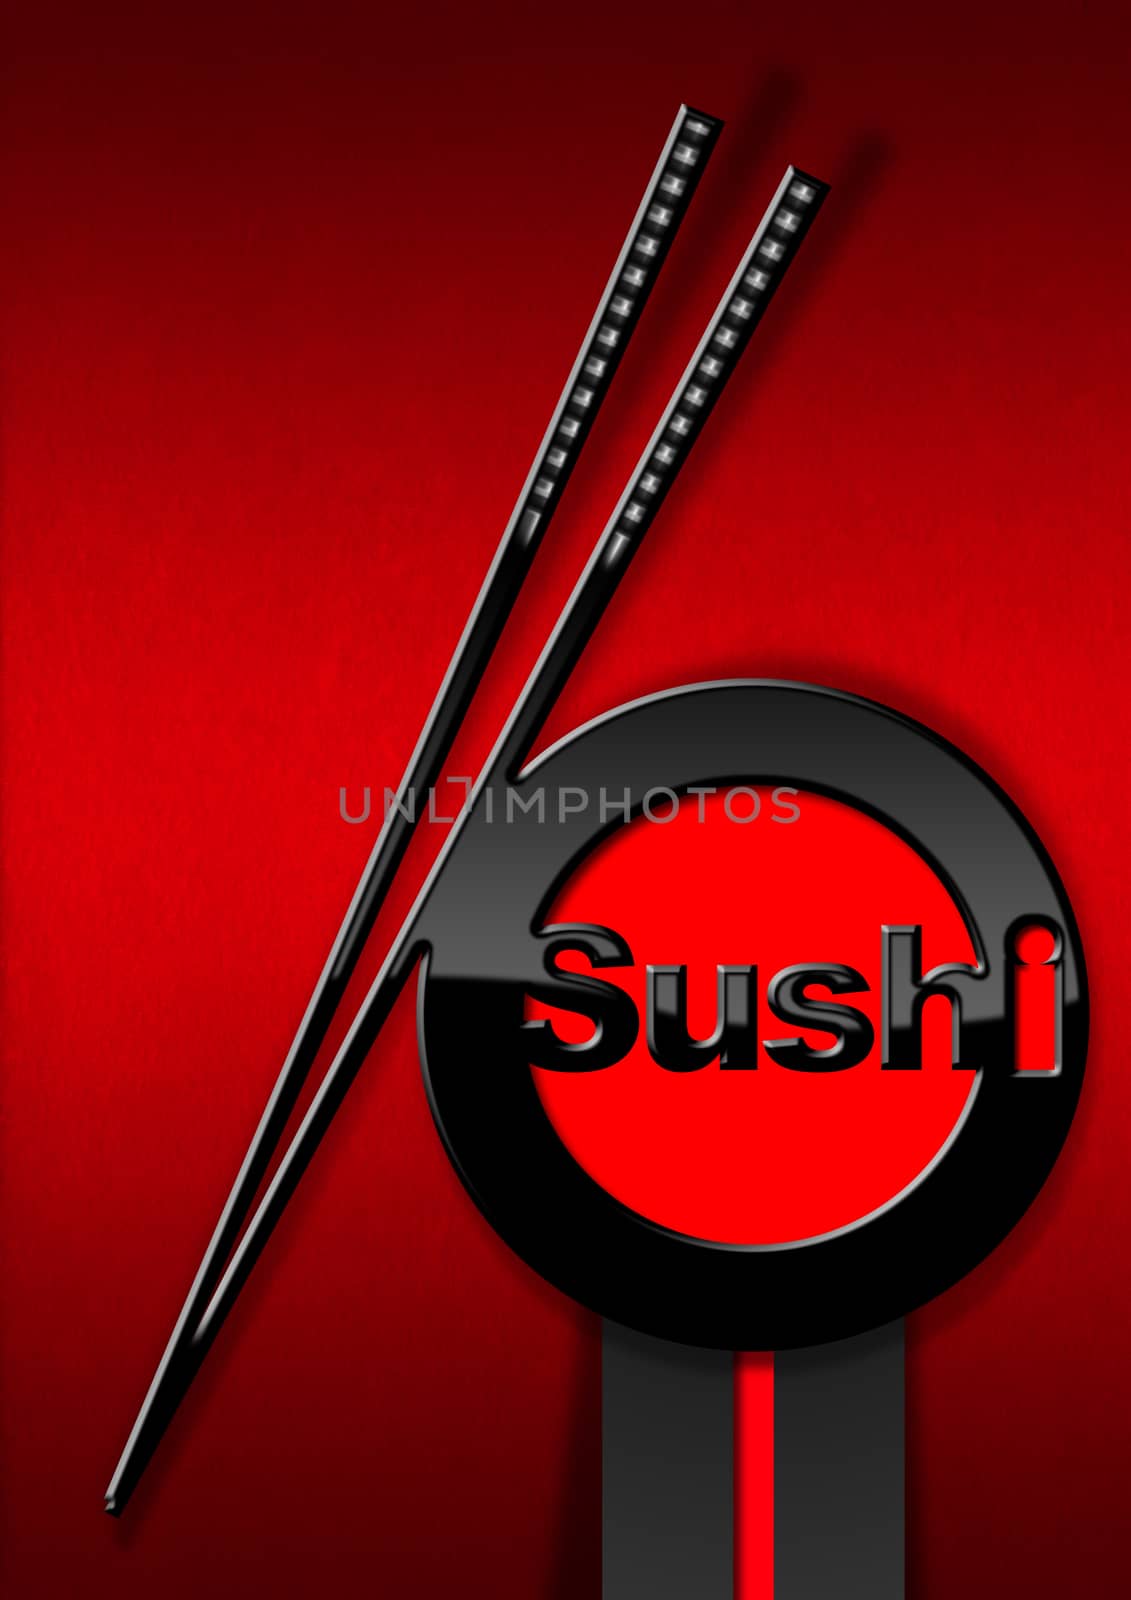 Sushi menu design with a black and red symbol with chopsticks and text Sushi on a red velvet background with shadows